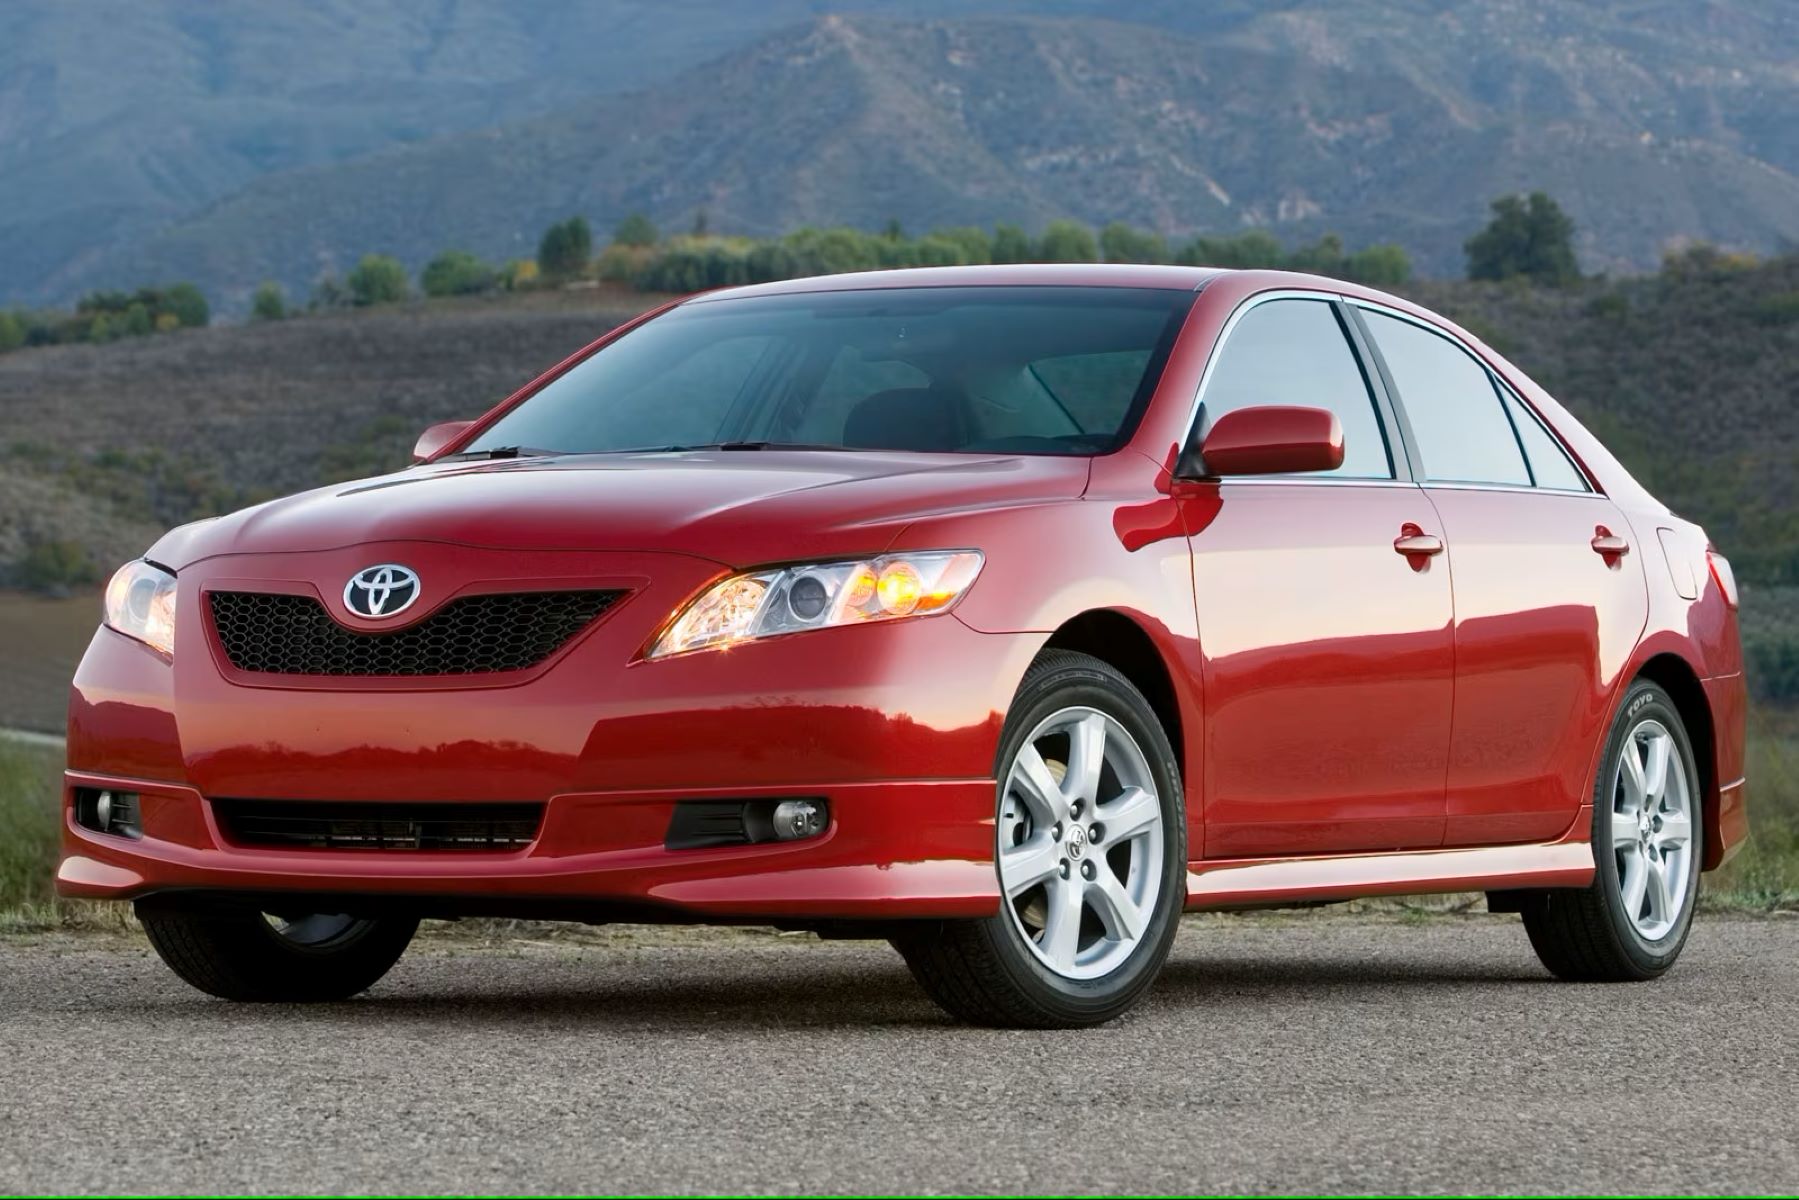 Unleash The Reliability Of The 2007 Toyota Camry 4-Cylinder!